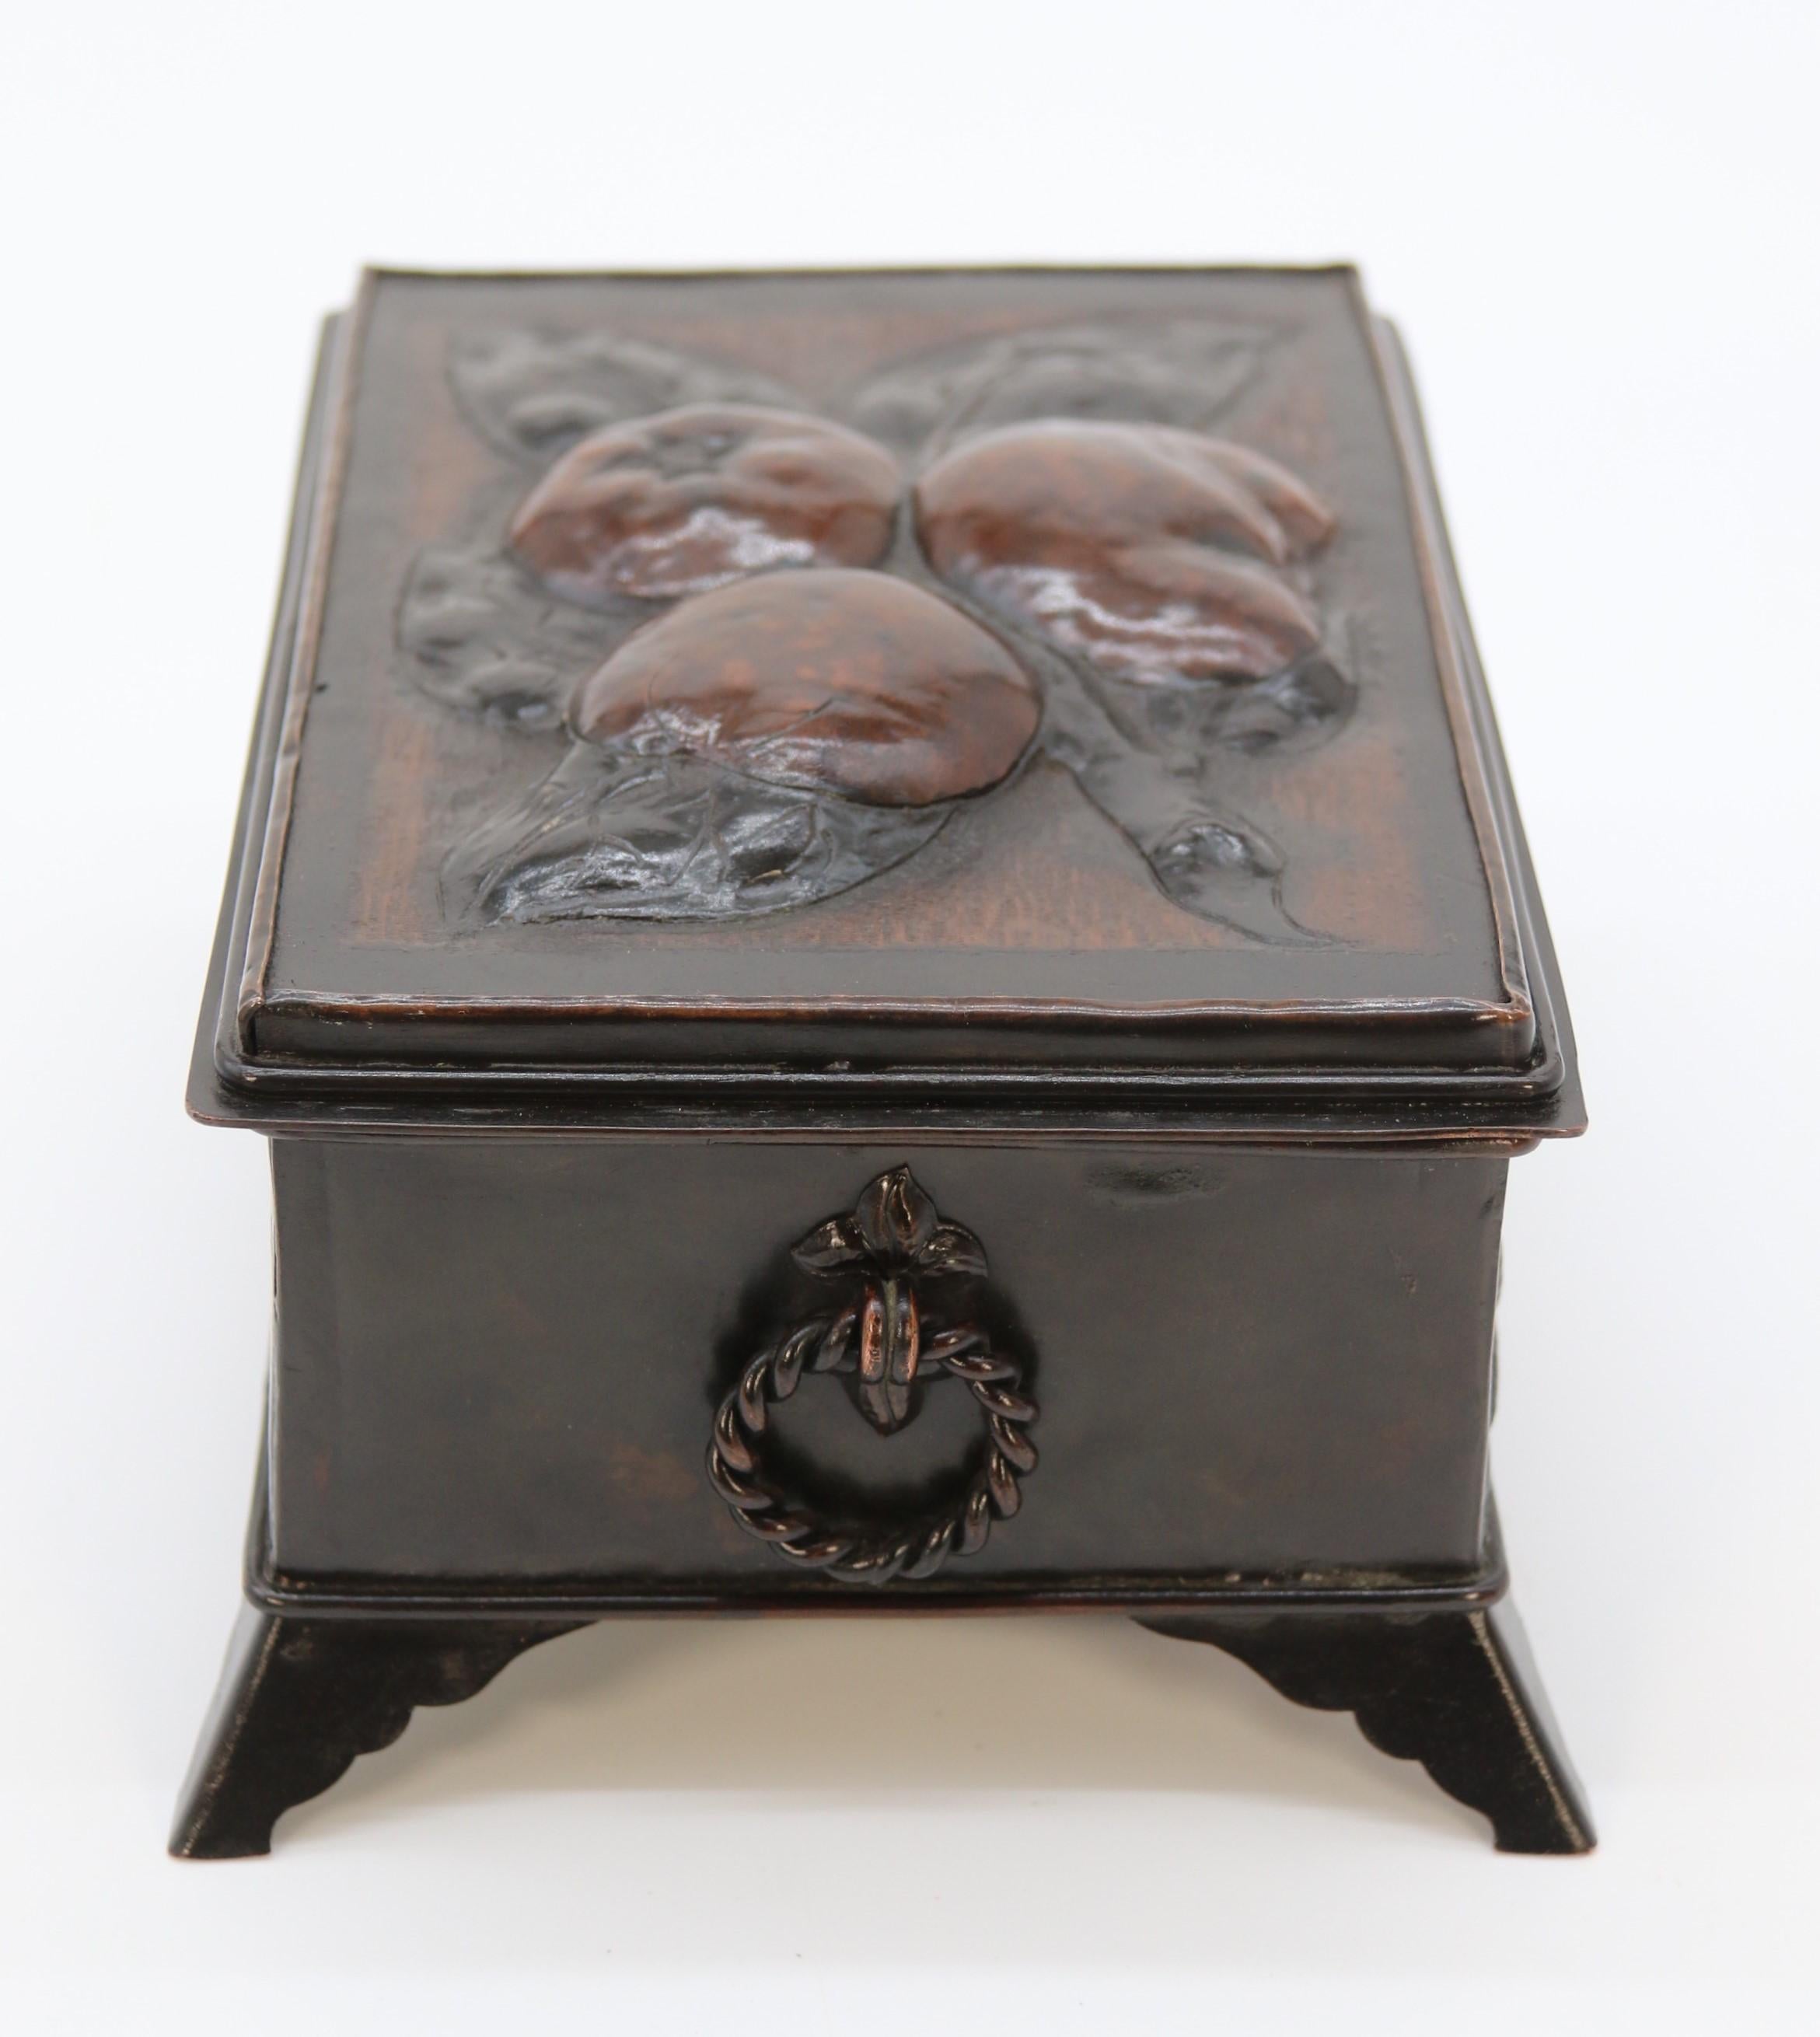 Repoussé Arts and Crafts William Morris style copper repousse hand decorated box C 1900 For Sale